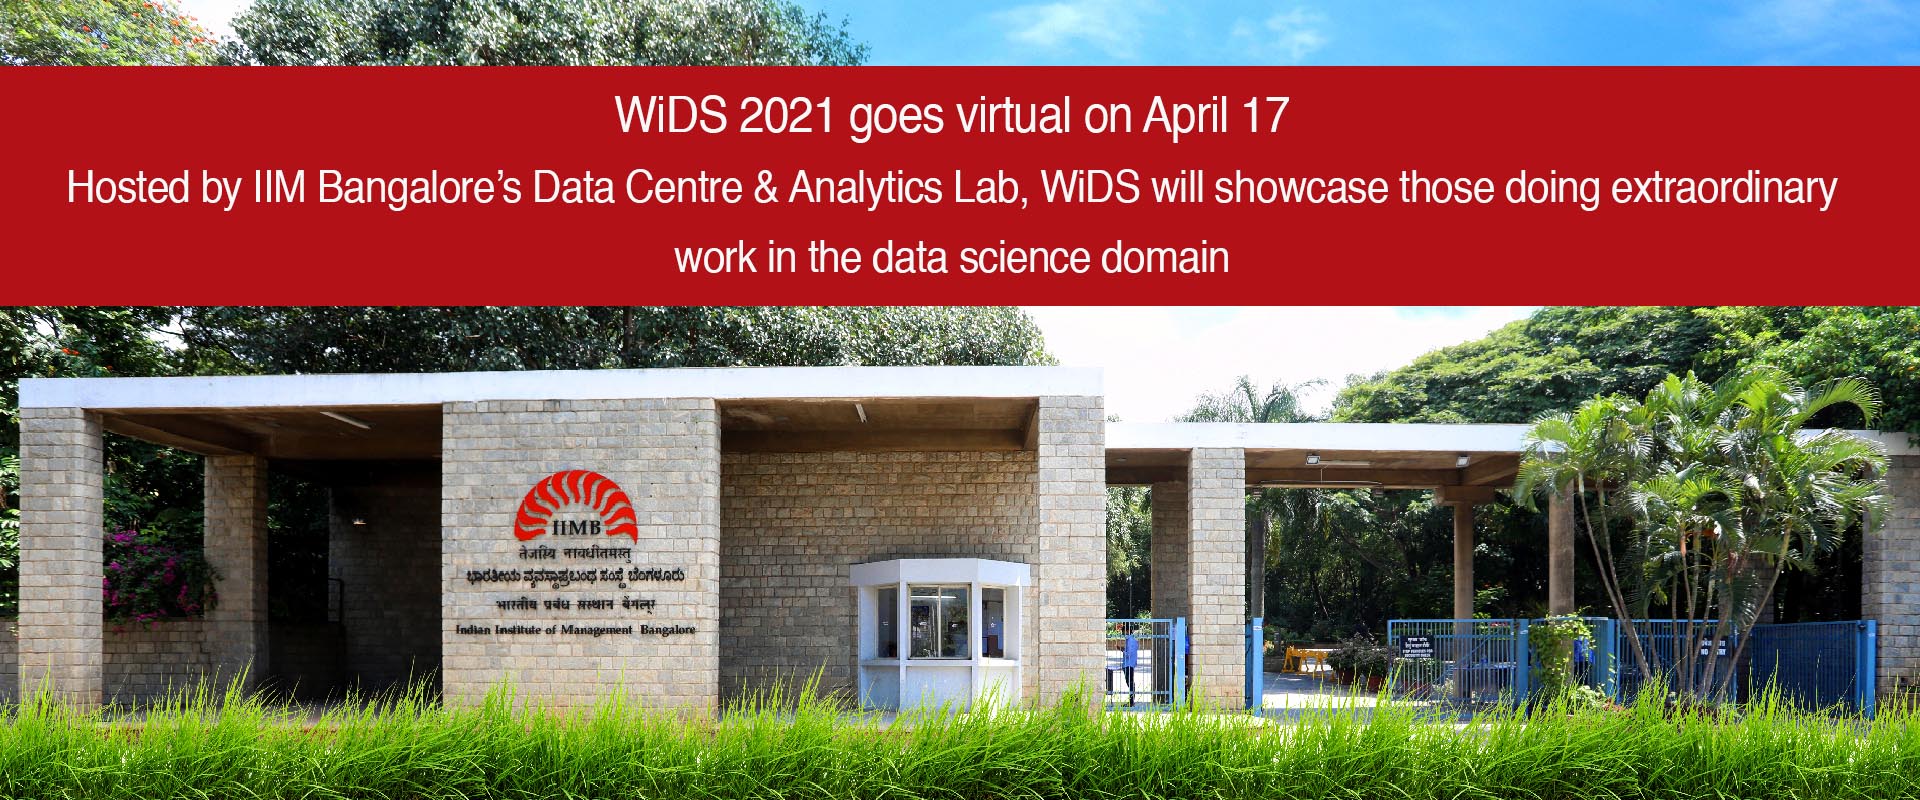 WiDS 2021 goes virtual on April 17